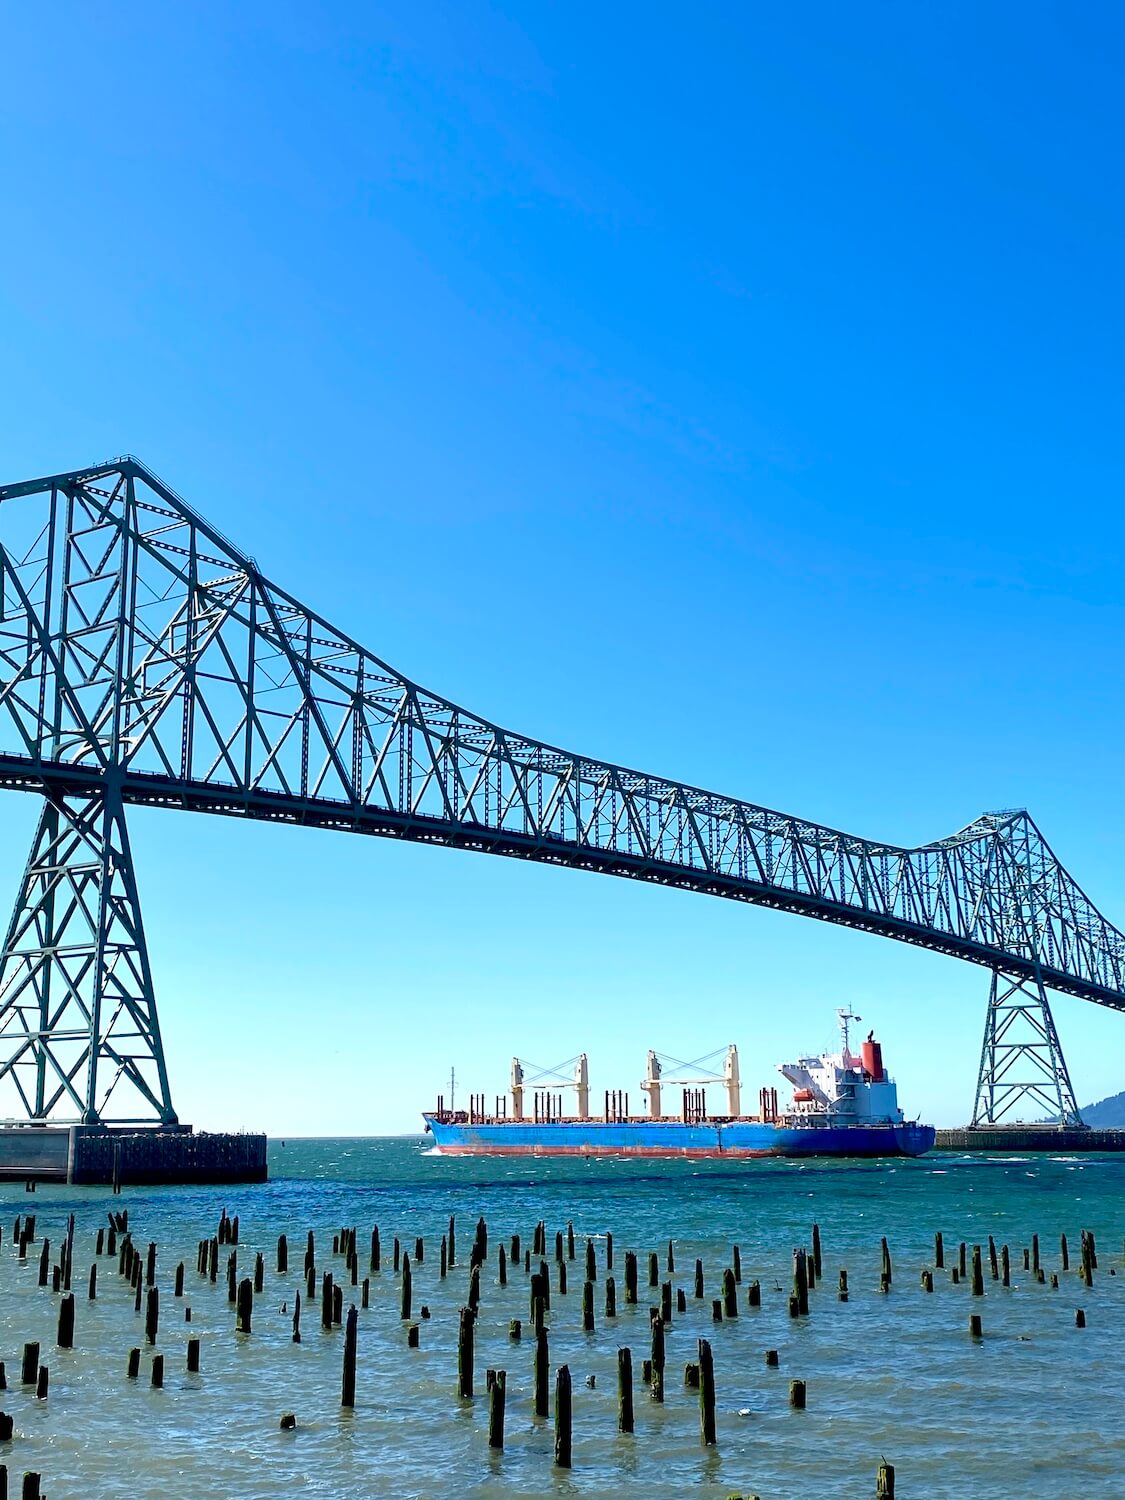 A large sea going vessel floats underneath the Astoria Bridge on the way out to sea.  The ship is carrying grain and has a blue hull with white upper decks.  The Astoria Bridge rises high up into the blue sky. 